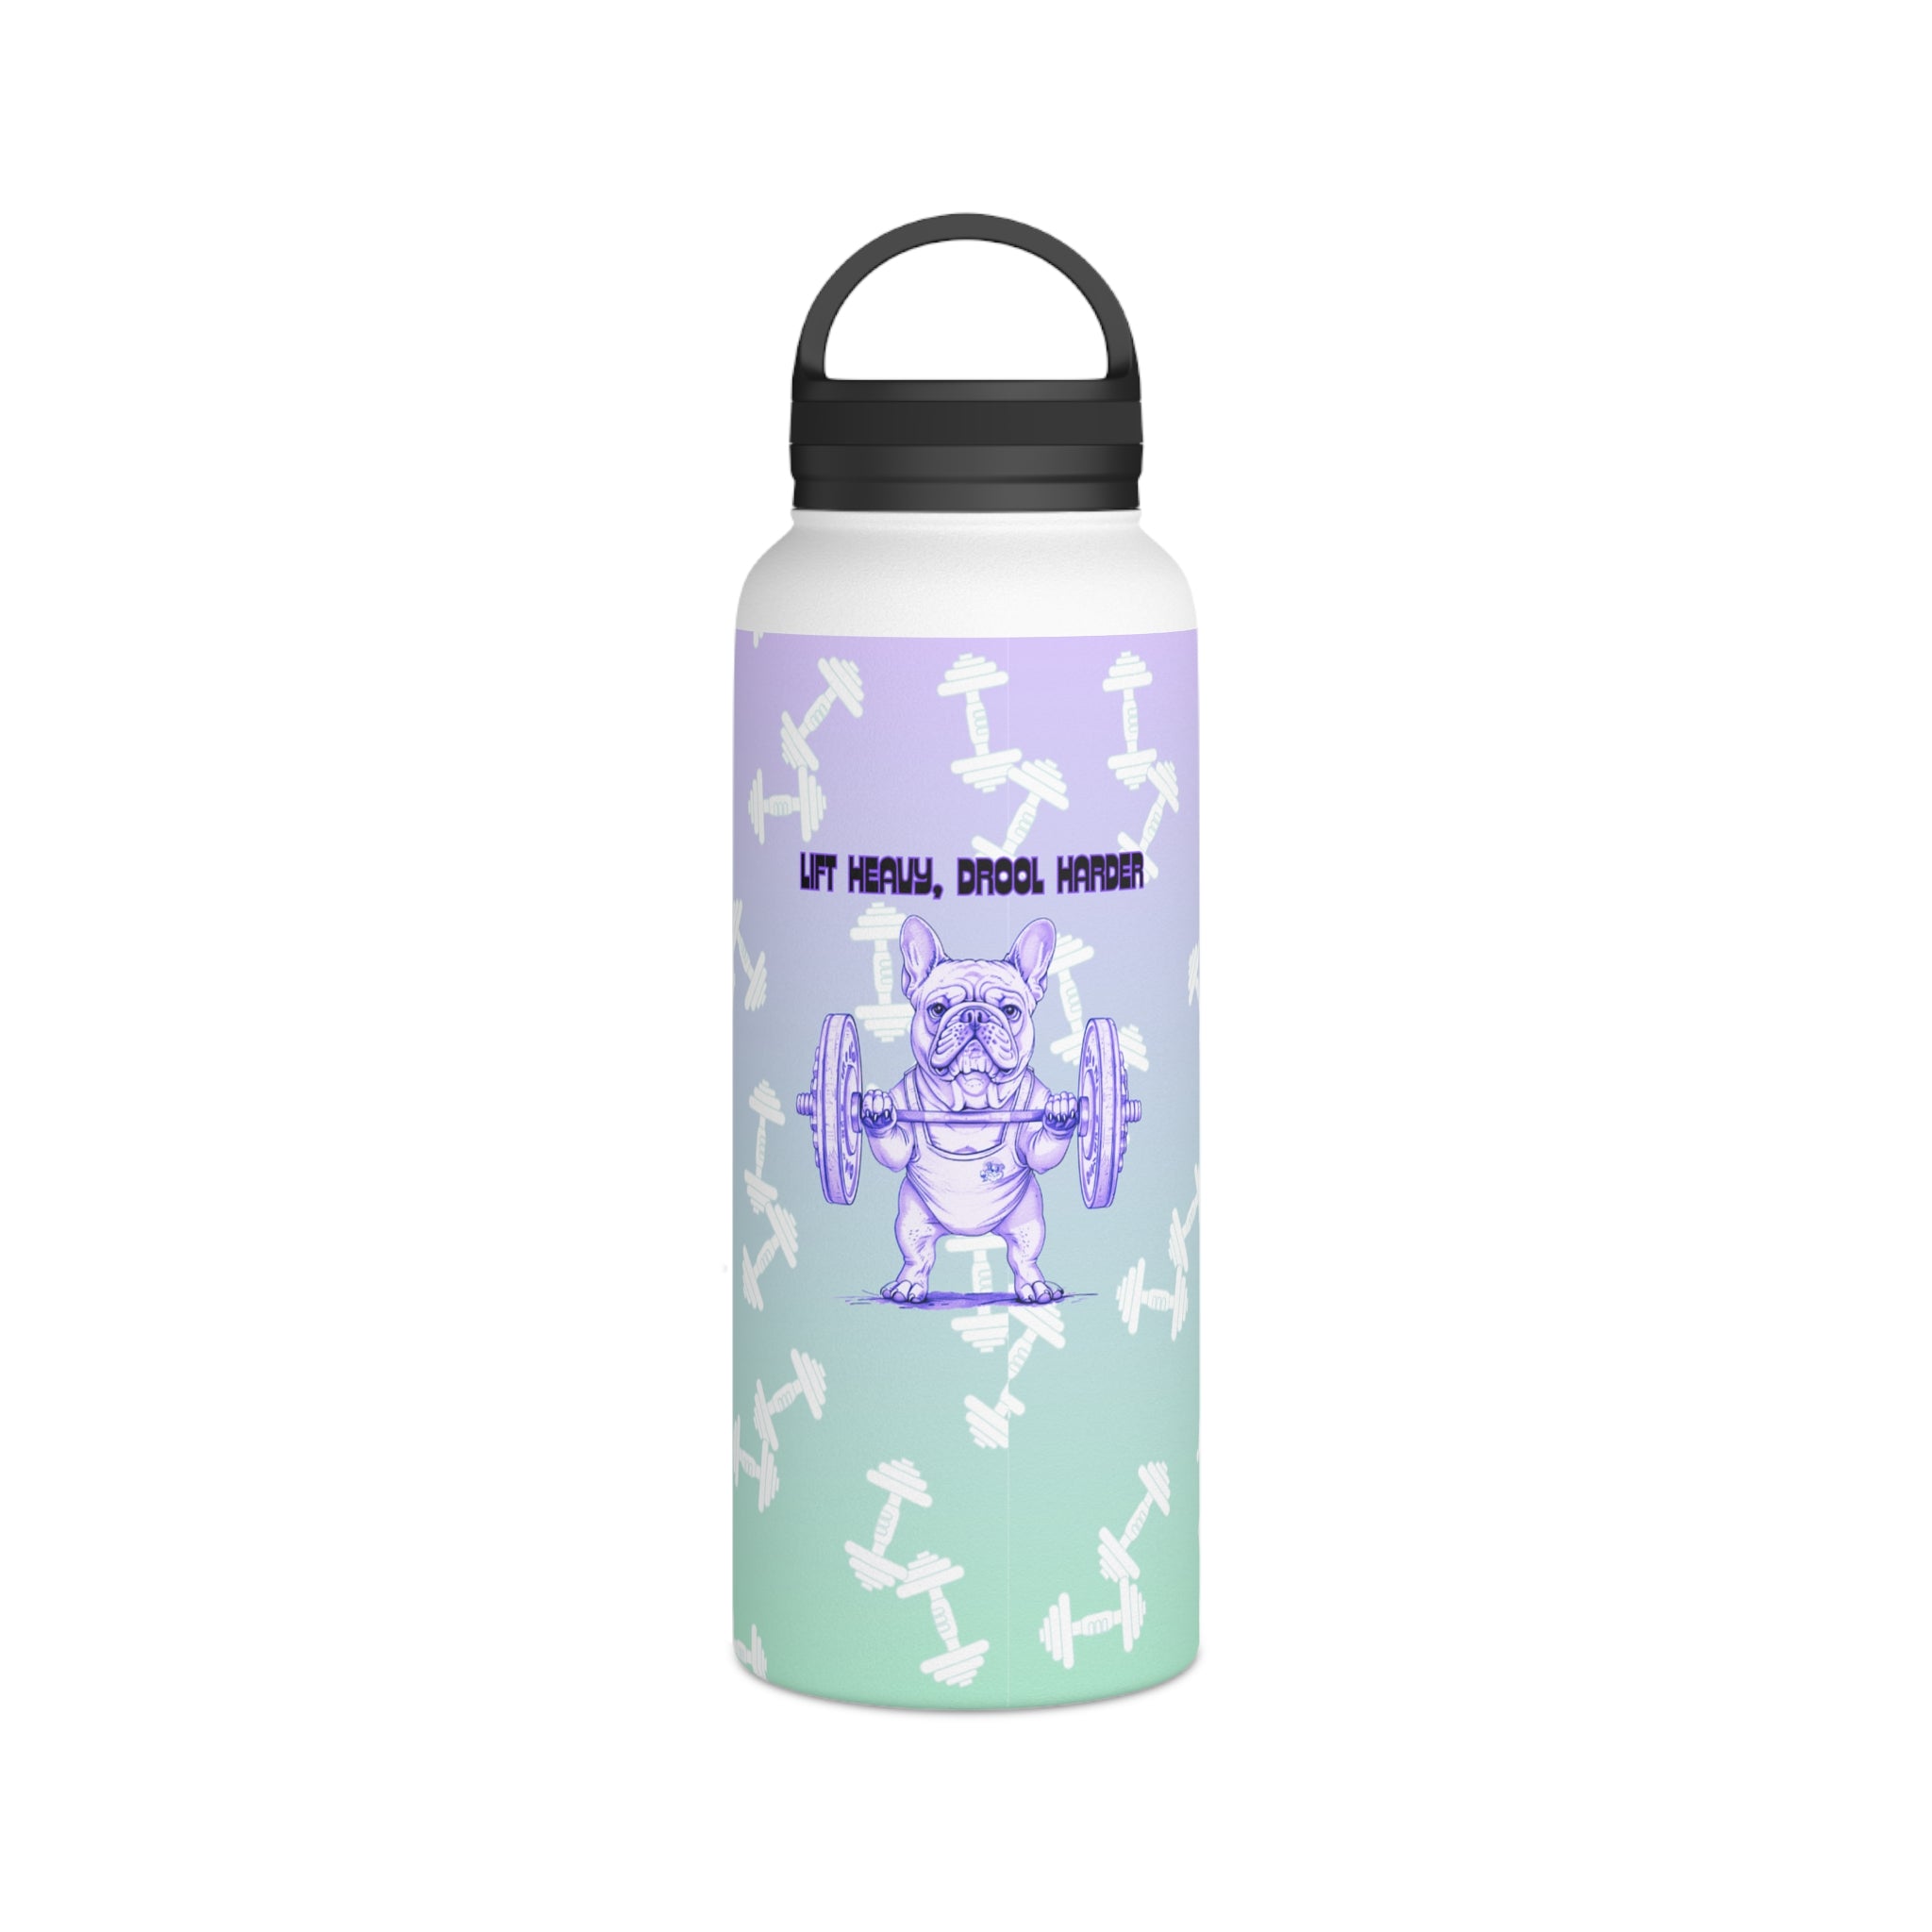 Tipsy Bully Ripped Bulldog Stainless Steel Water Bottle, Handle Lid (French/Purple)